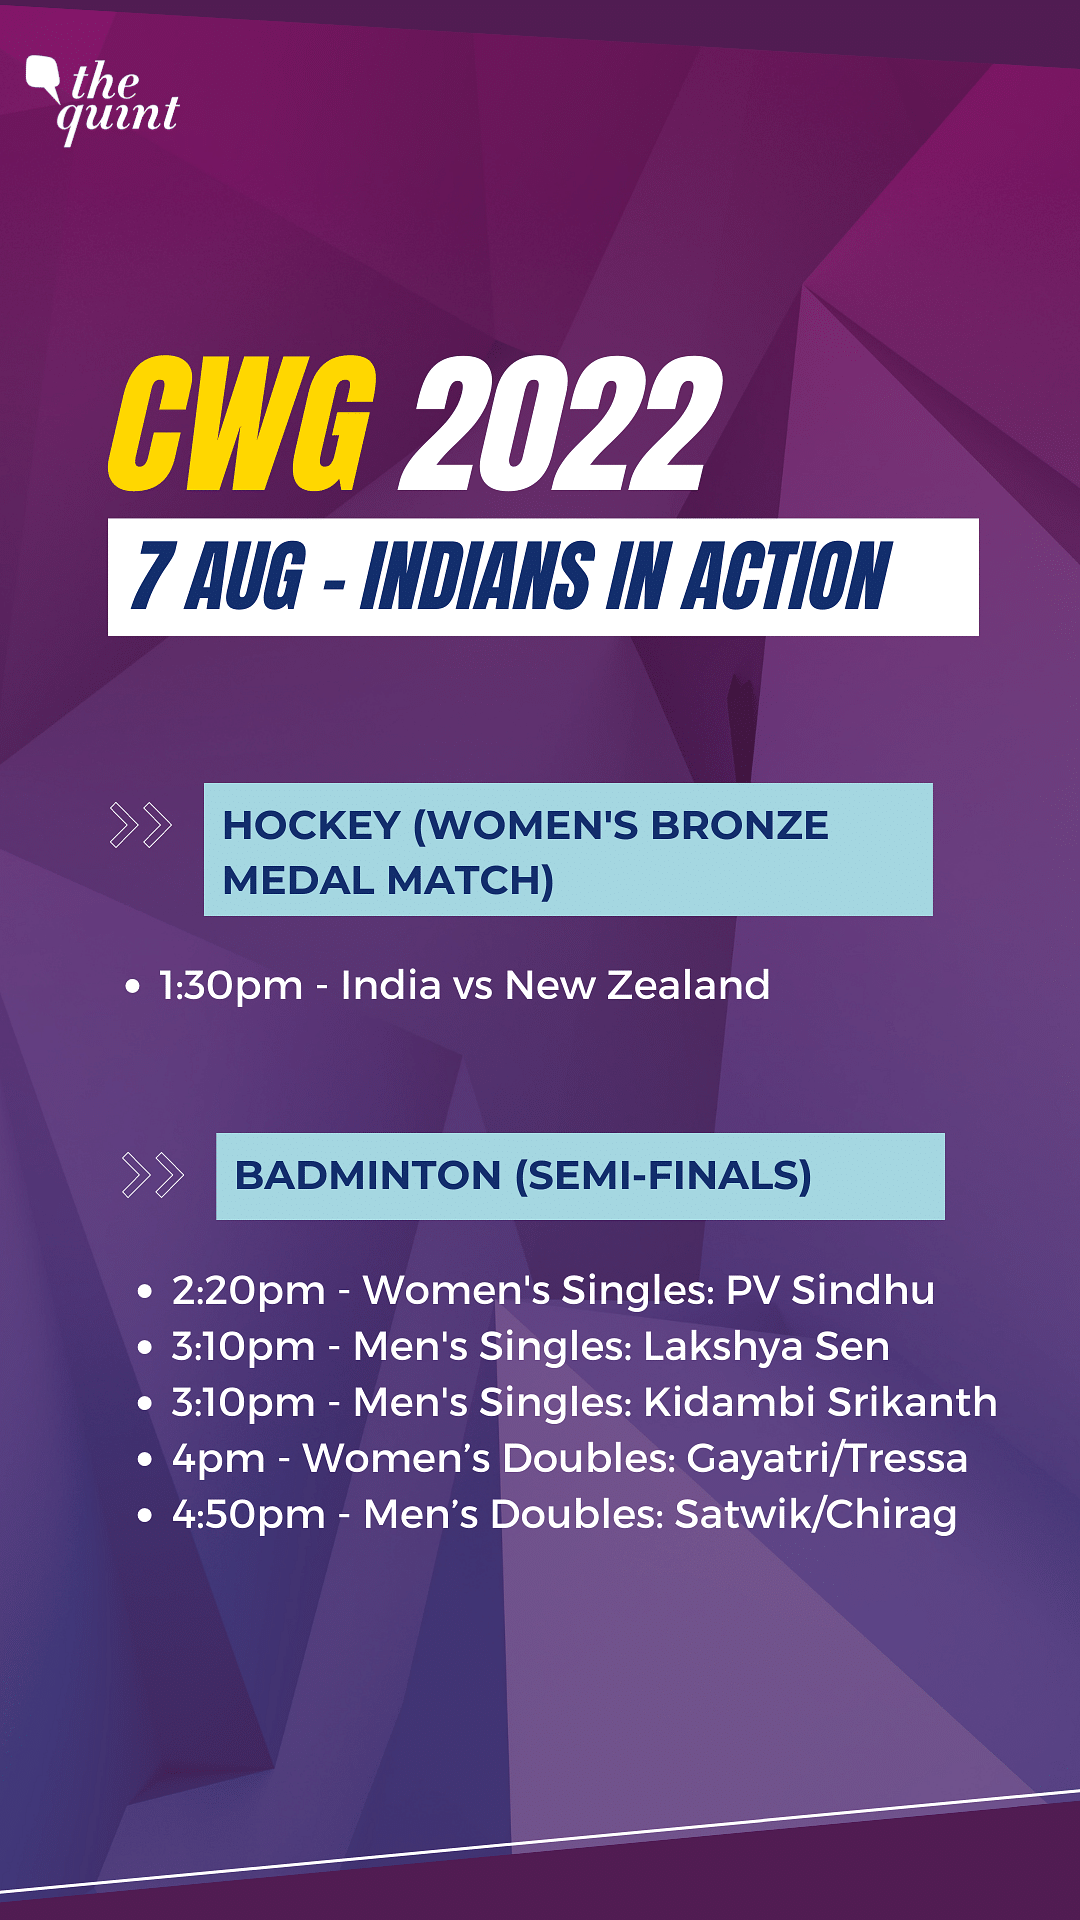 Indian women's hockey team will take on New Zealand in bronze medal match on Day 10 of the Commonwealth Games.